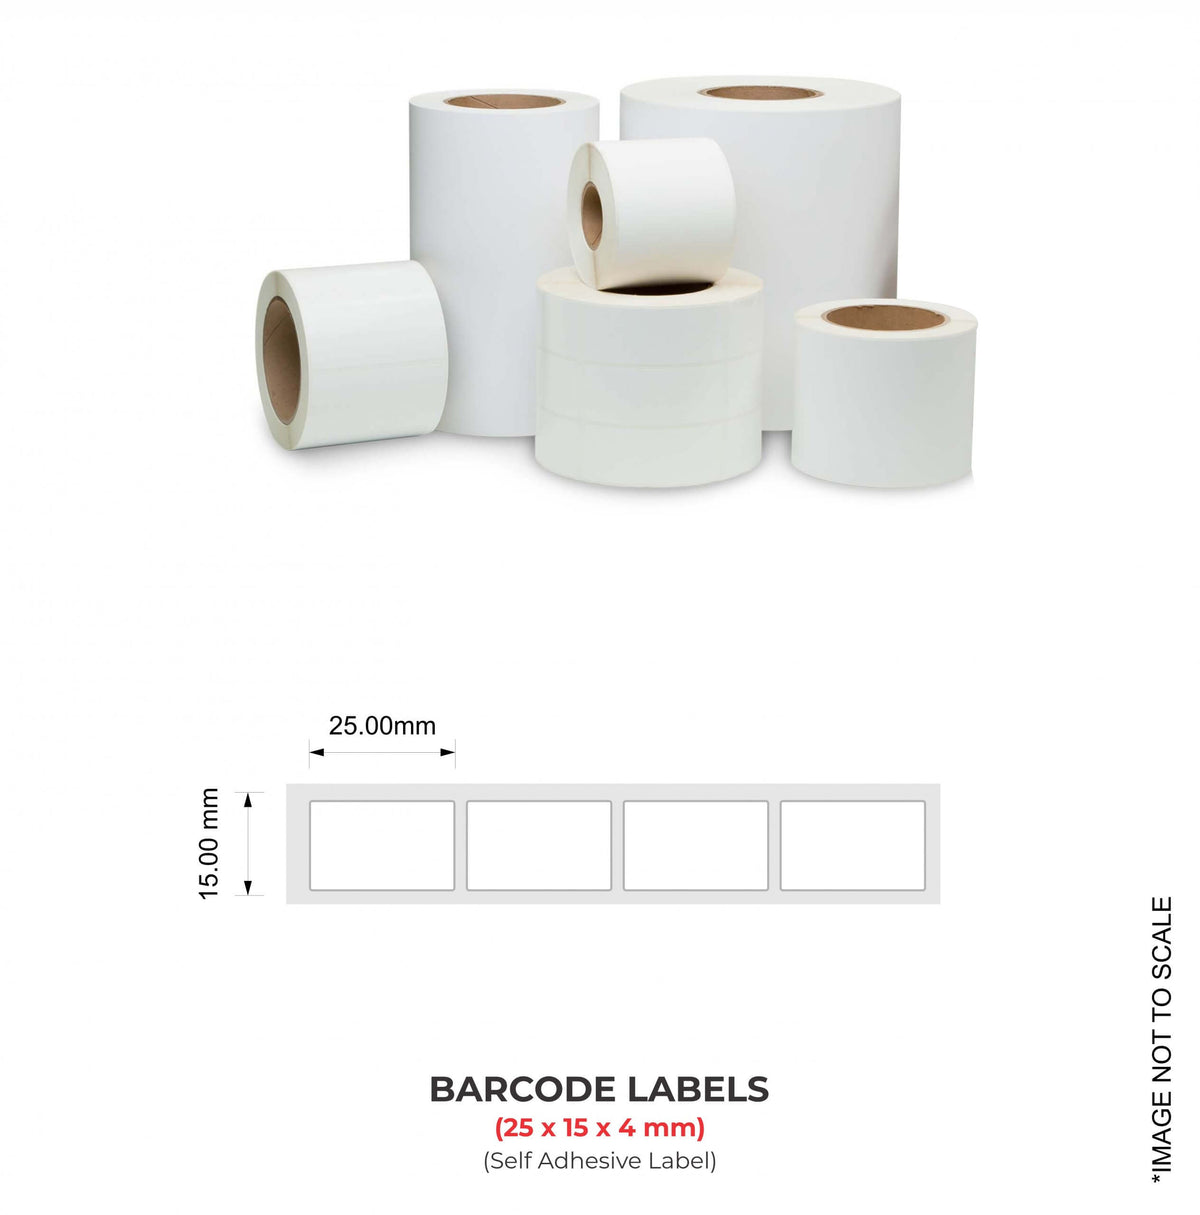 Barcode Labels (25mm x 15mm x 4), 12000 Labels Per Roll (Self Adhesive Label)